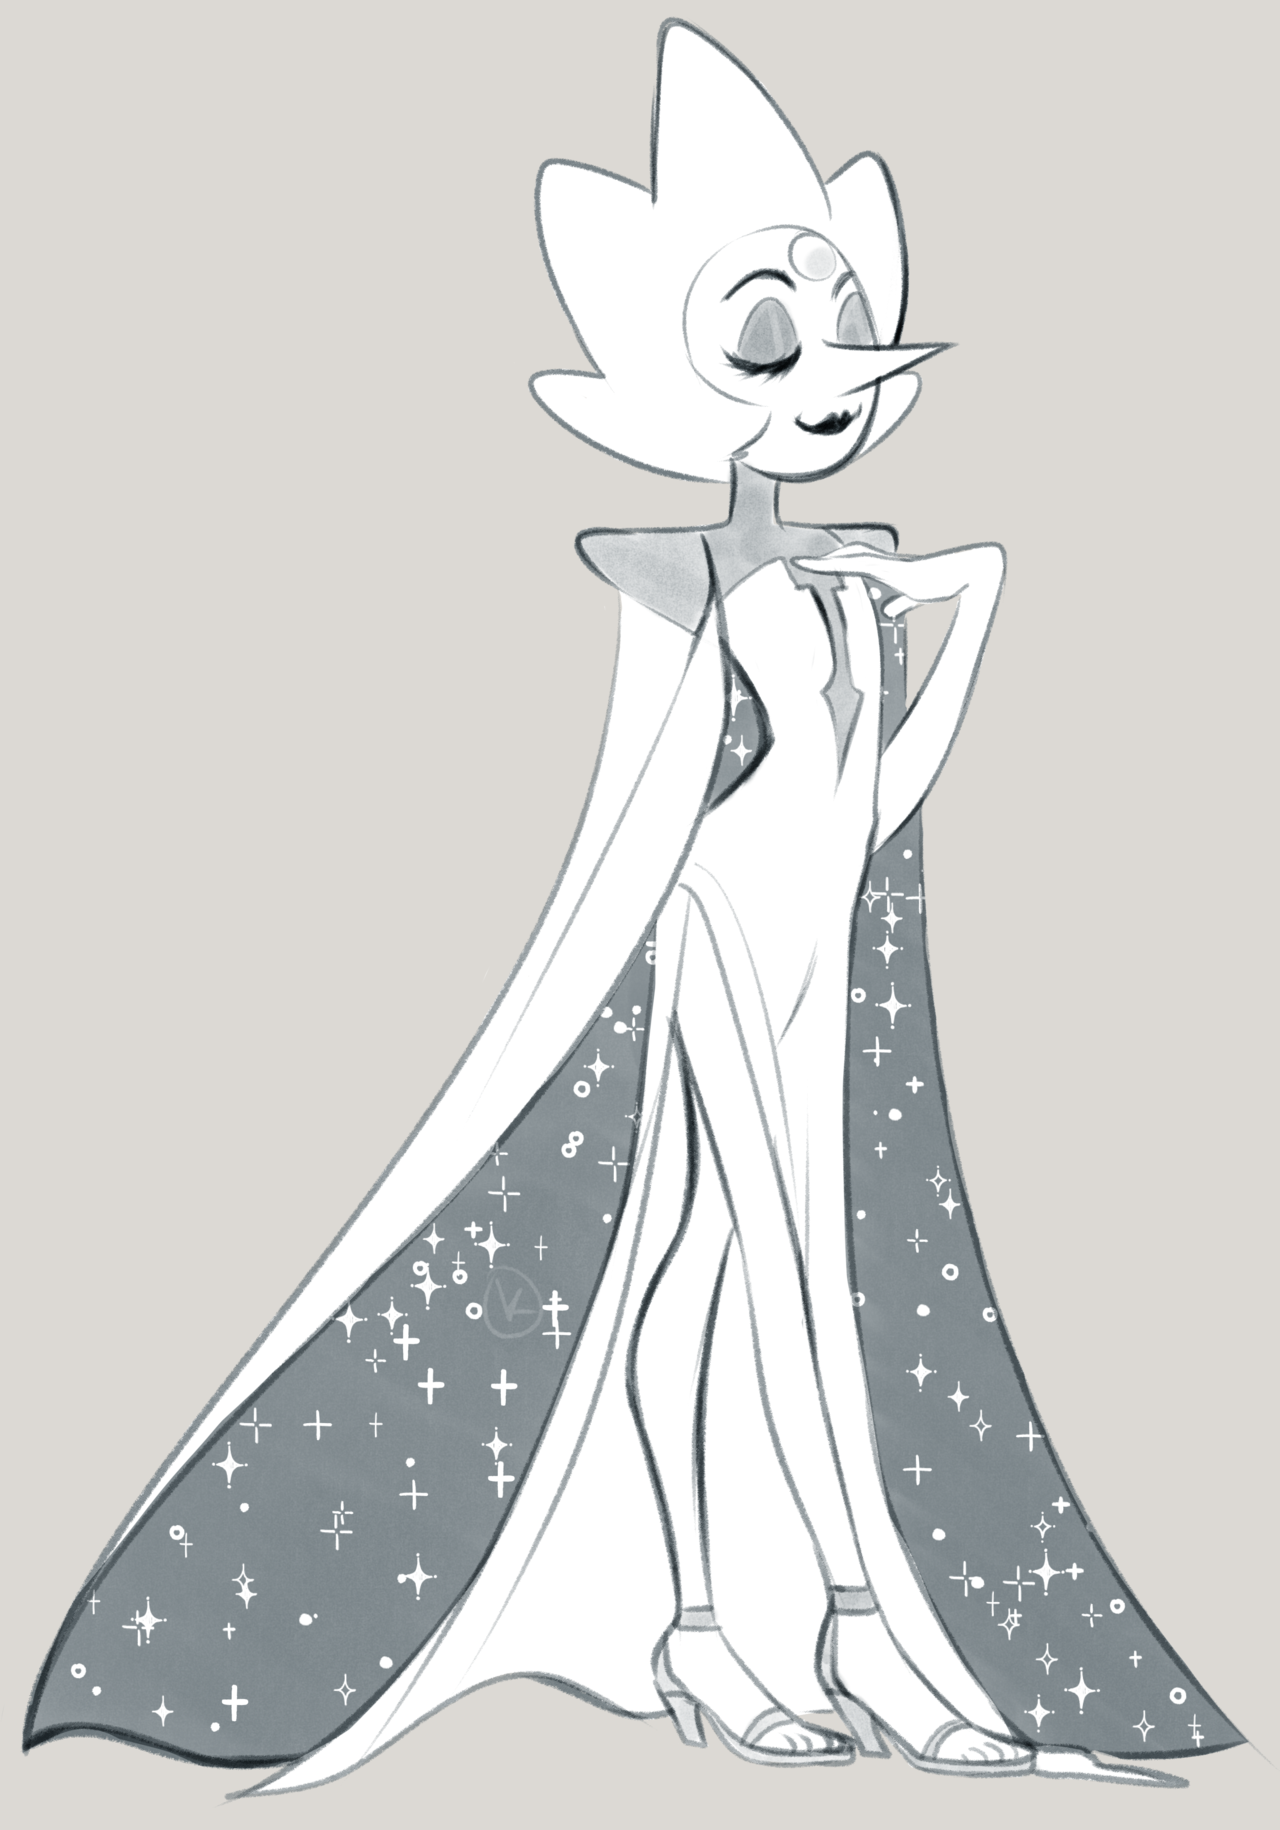 diamonds but they’re pearl shaped